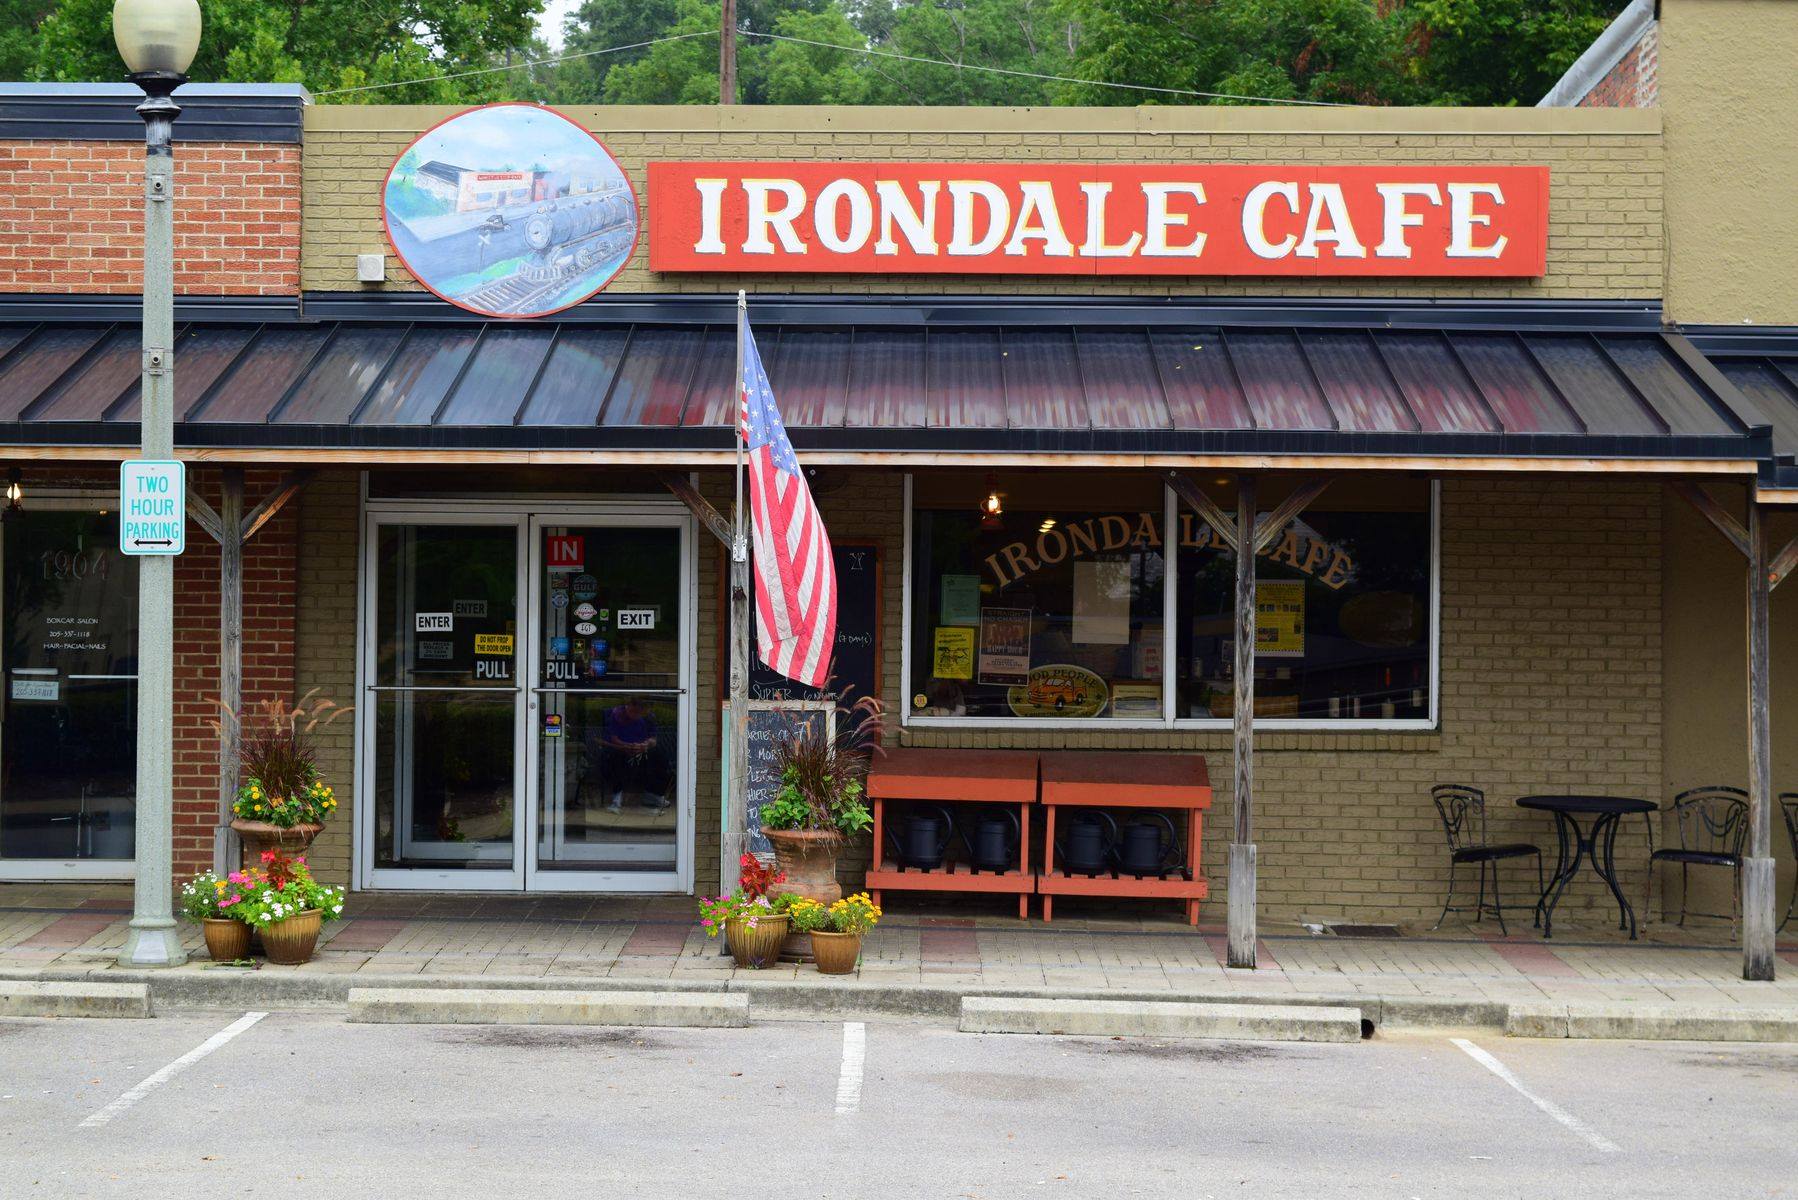 20689749 10155673338361204 6892722103005087653 o Giuseppe's, Irondale Cafe, Snapper Grabbers among establishments receiving 95 and above food service scores in March